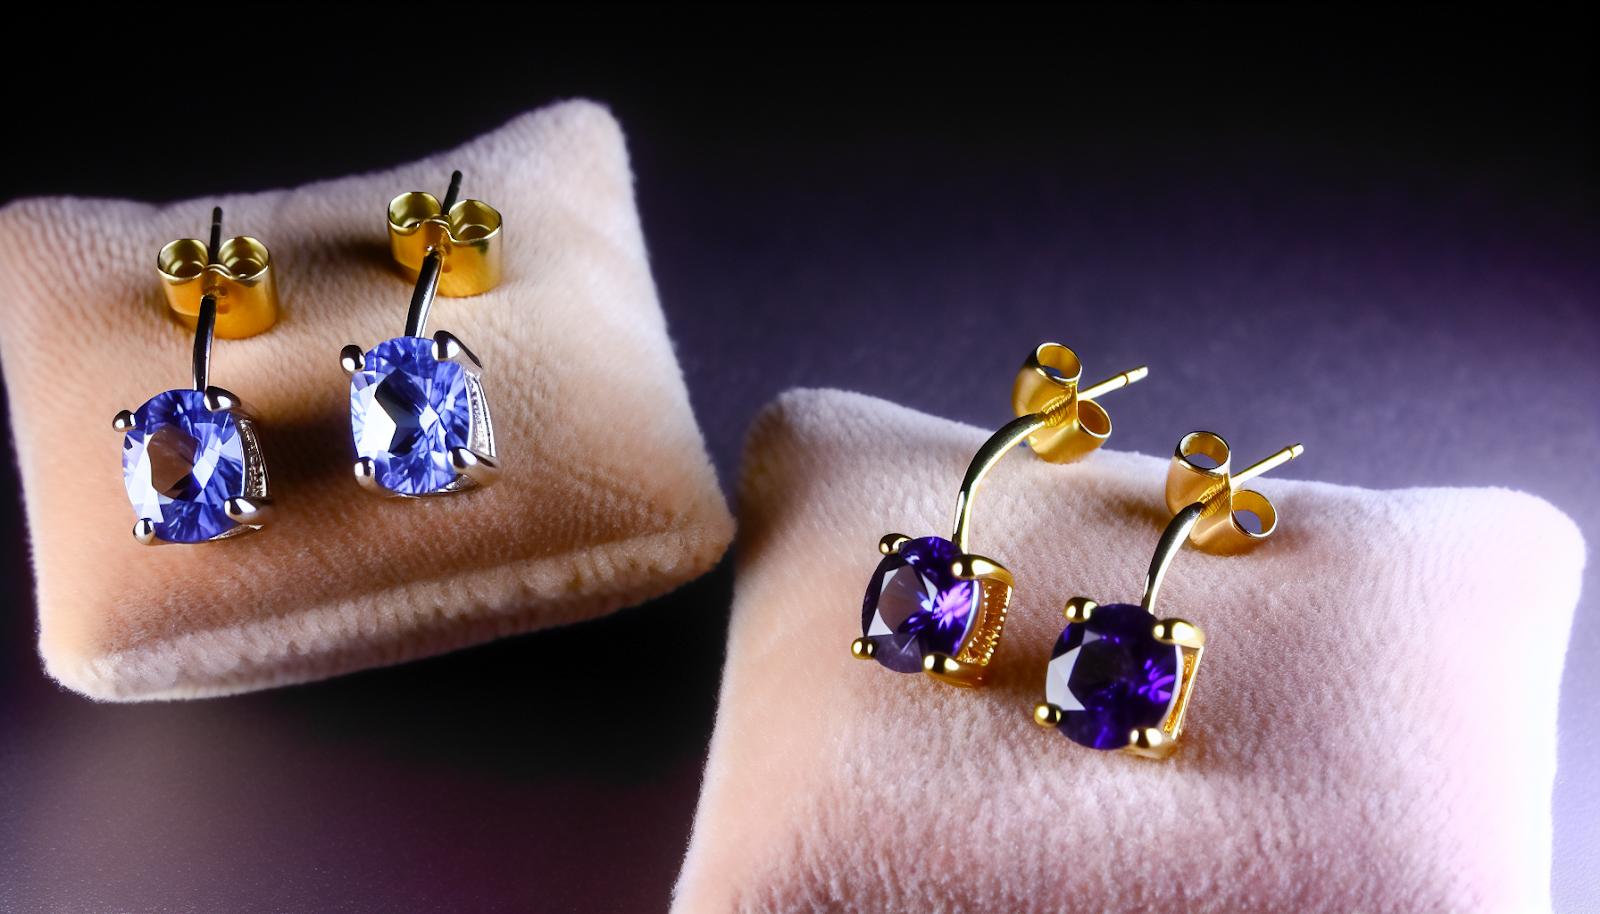 Comparison of tanzanite earrings in different metals